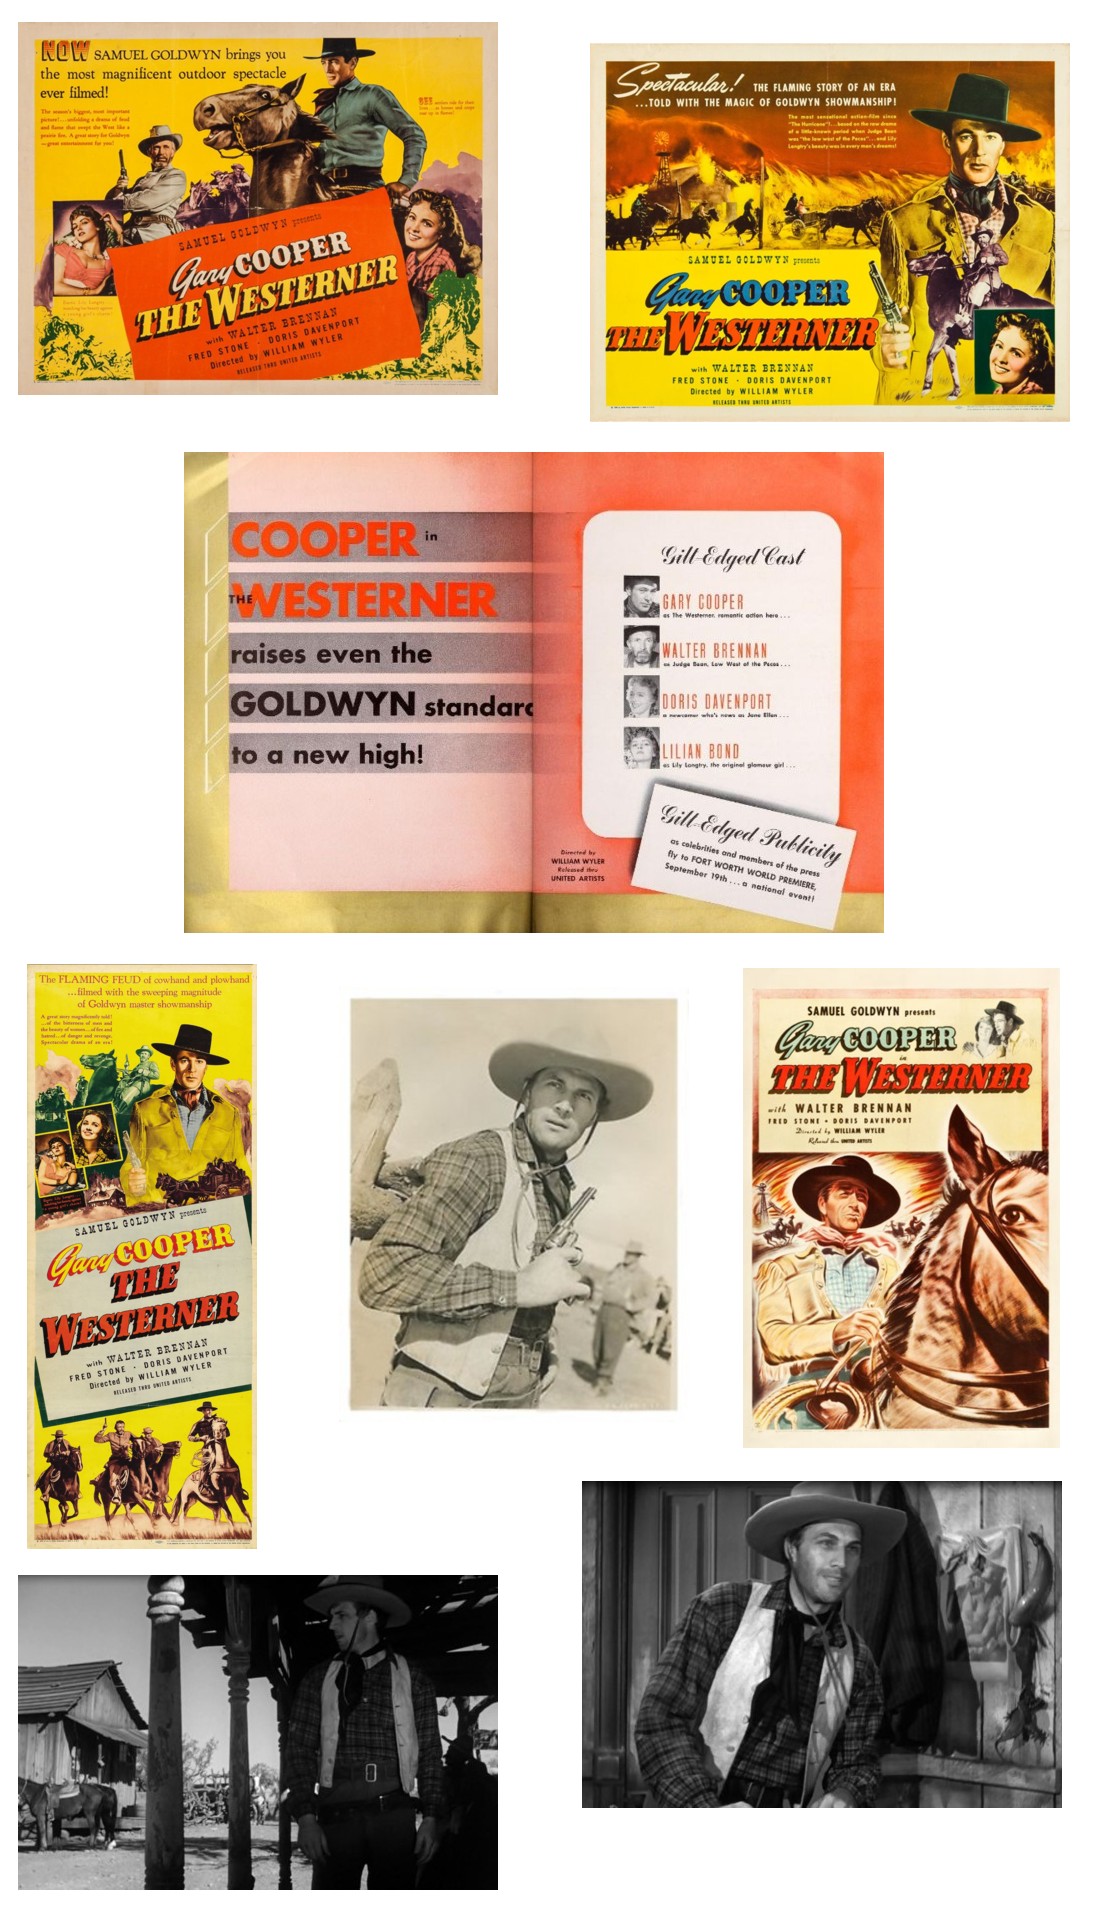 The Westerner lobby card half sheet two-page ad one sheet screencaps insert film